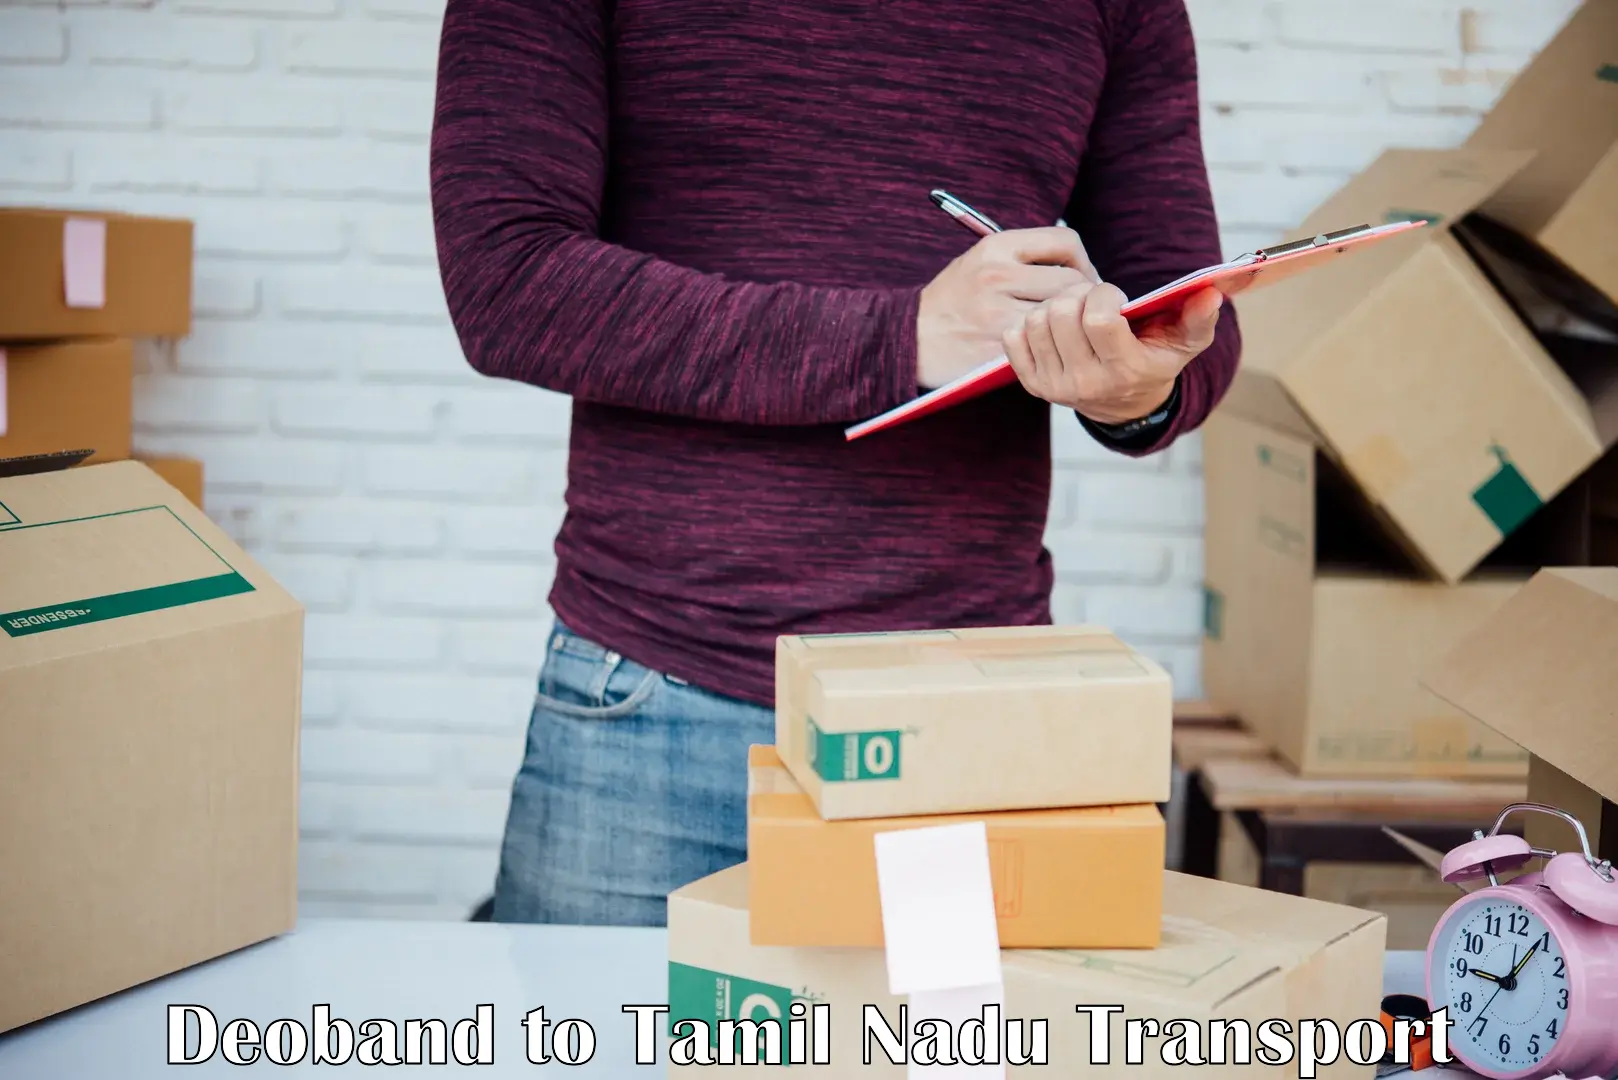 Delivery service Deoband to Tamil Nadu